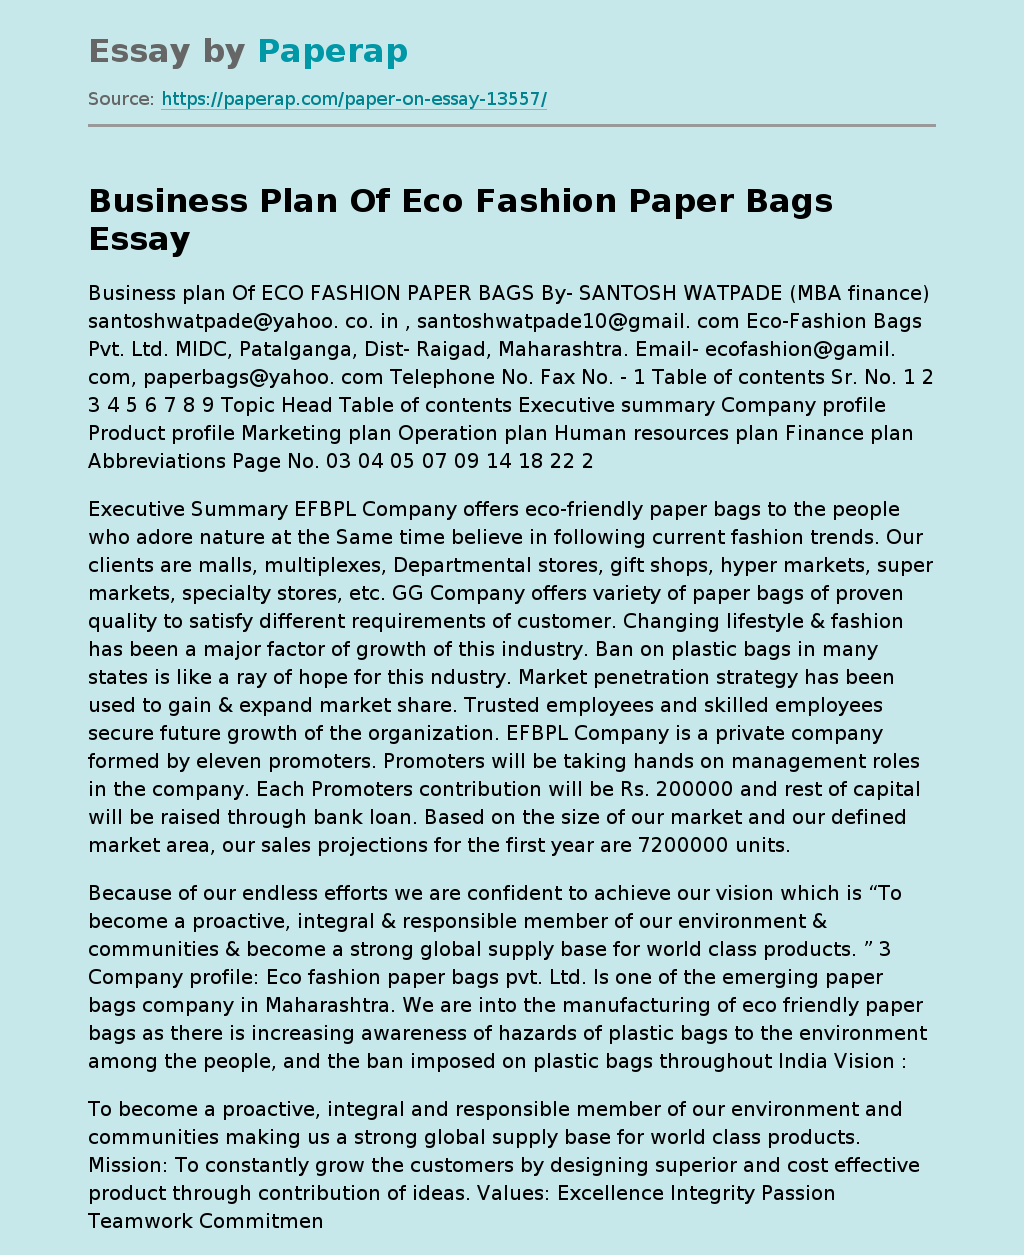 Business Plan Of Eco Fashion Paper Bags